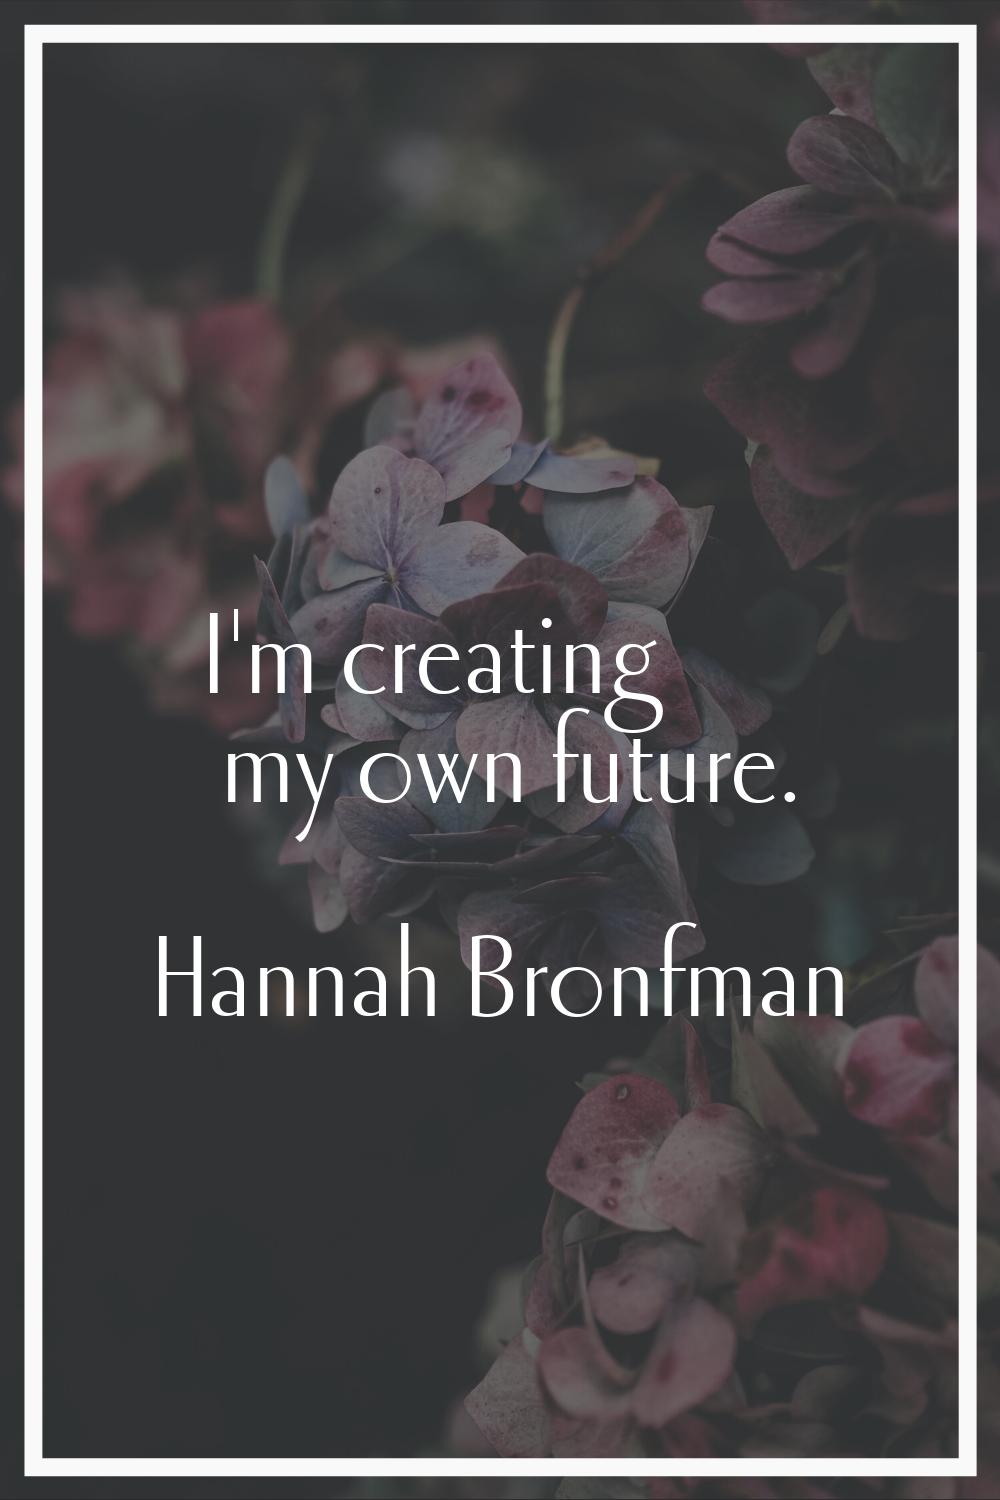 I'm creating my own future.